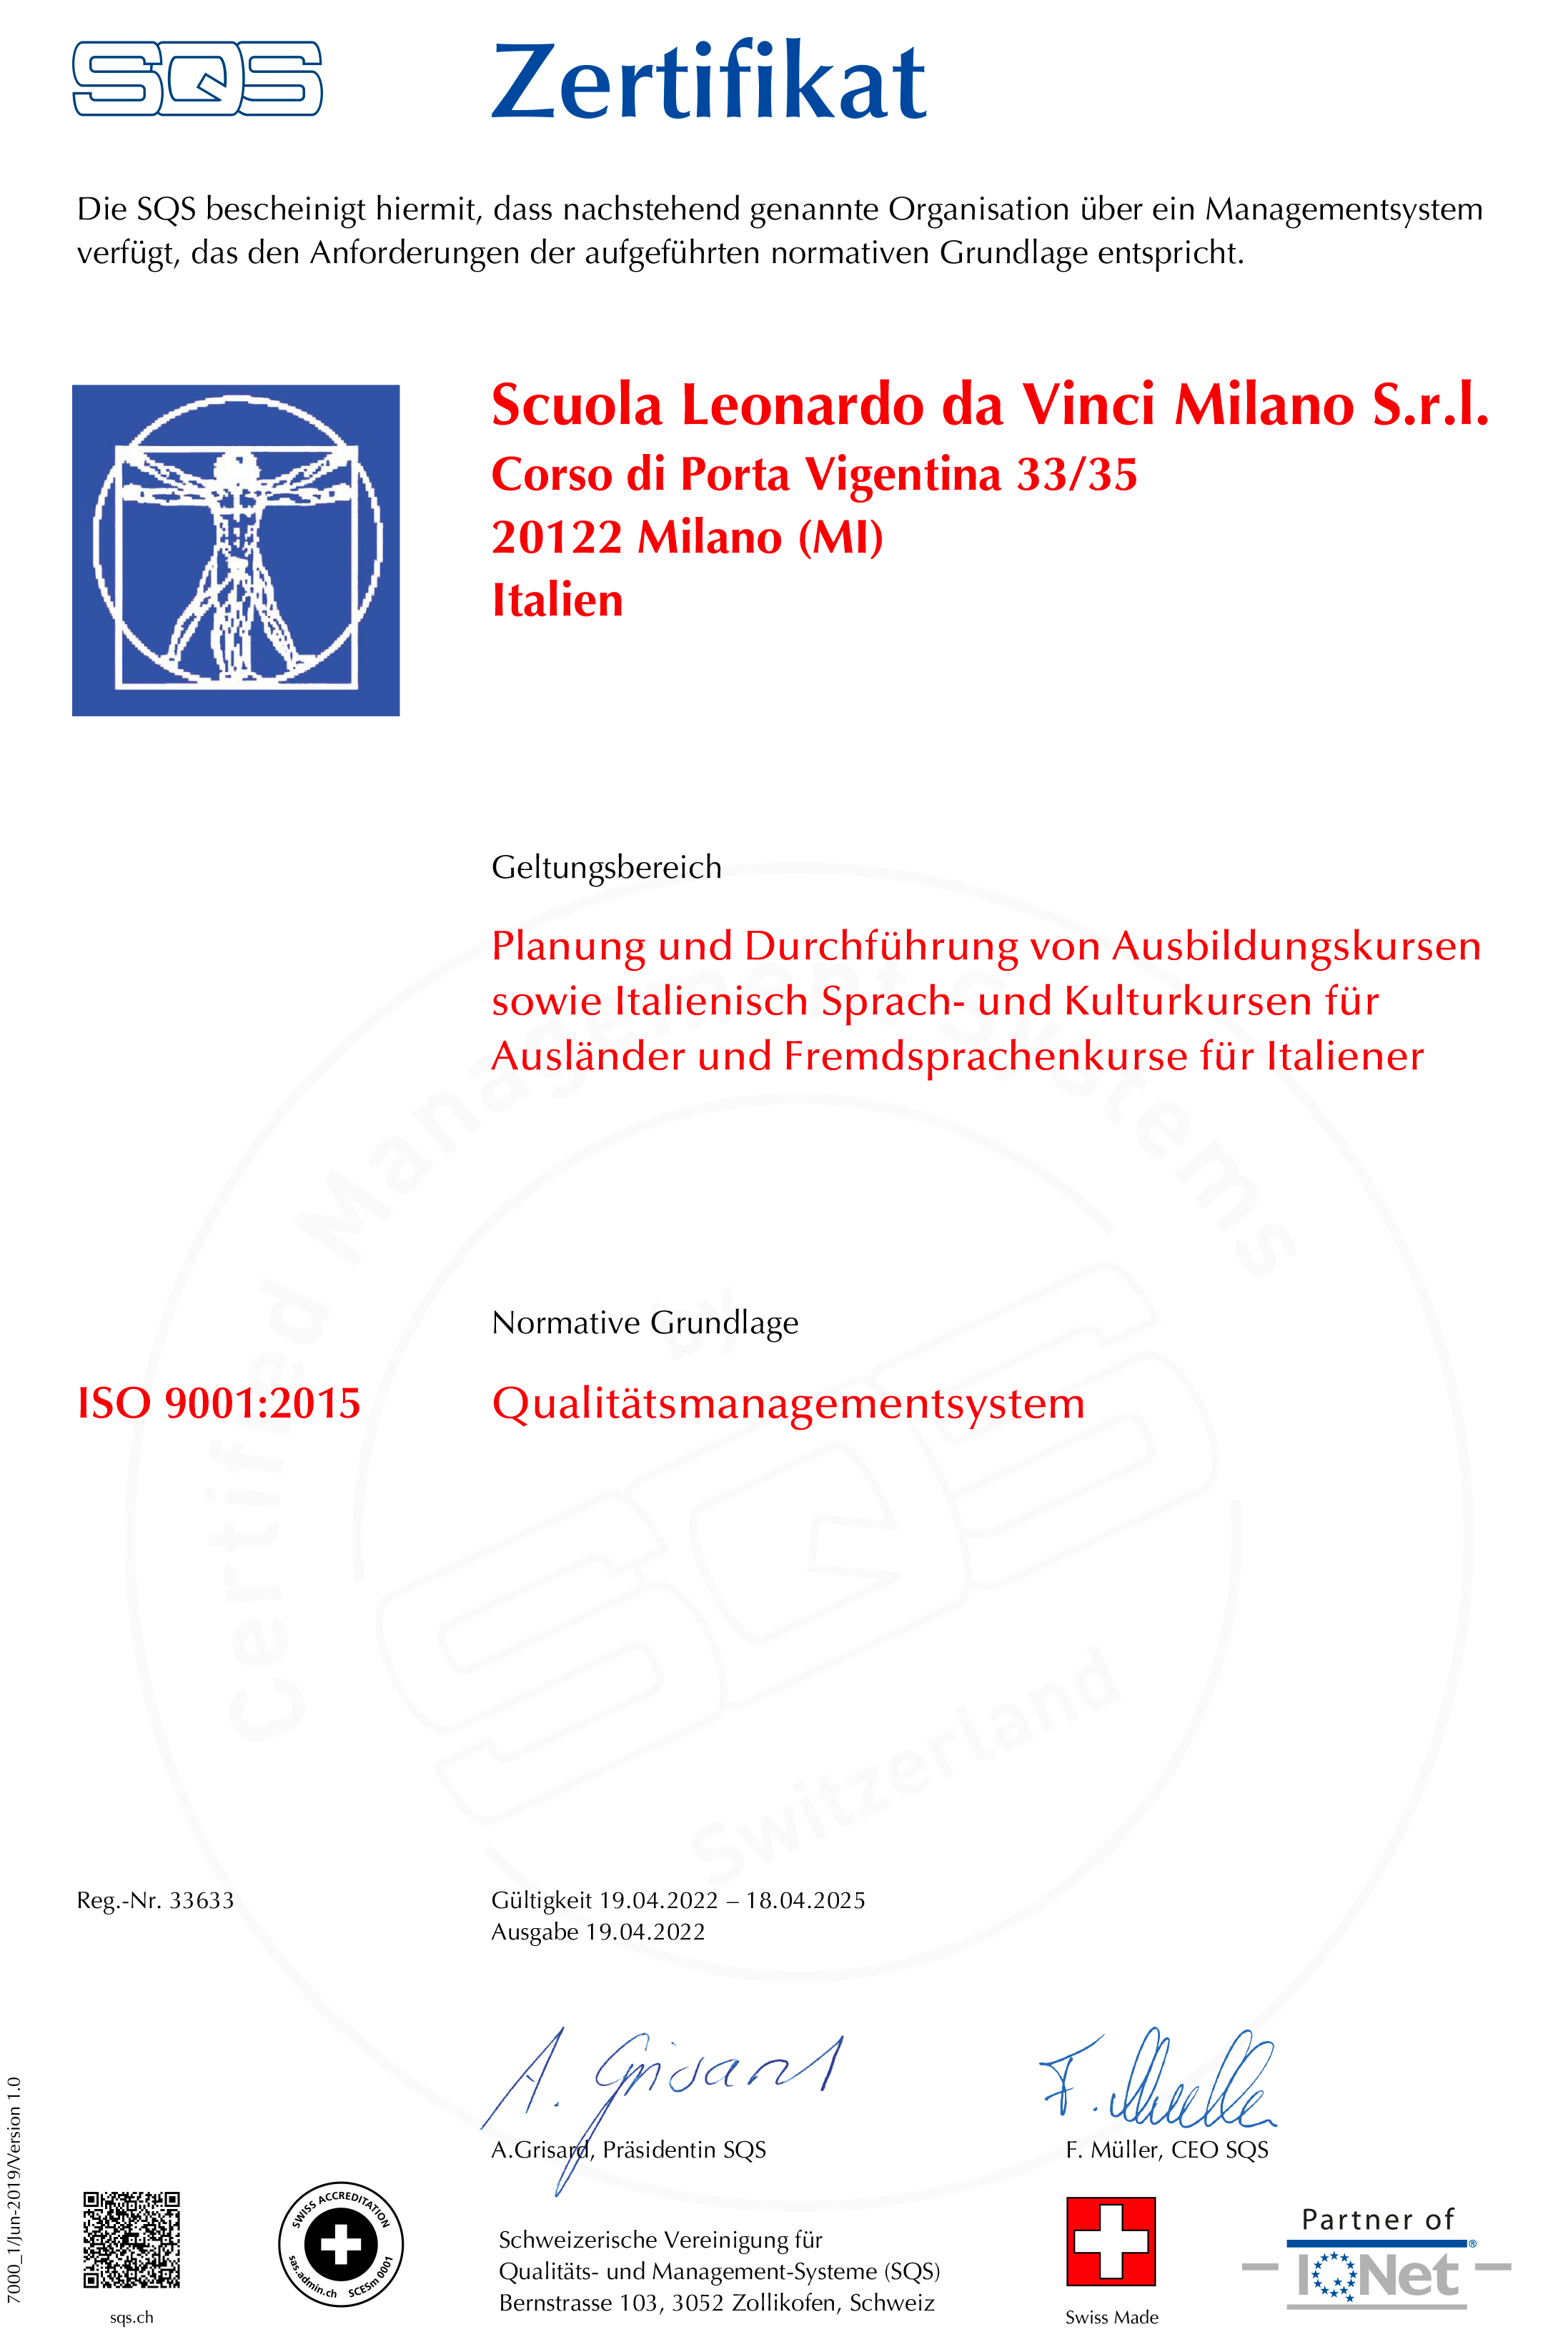 Our Italian school in Milan is certified to meet ISO 9001:2015, the internationally recognized standard for quality management systems